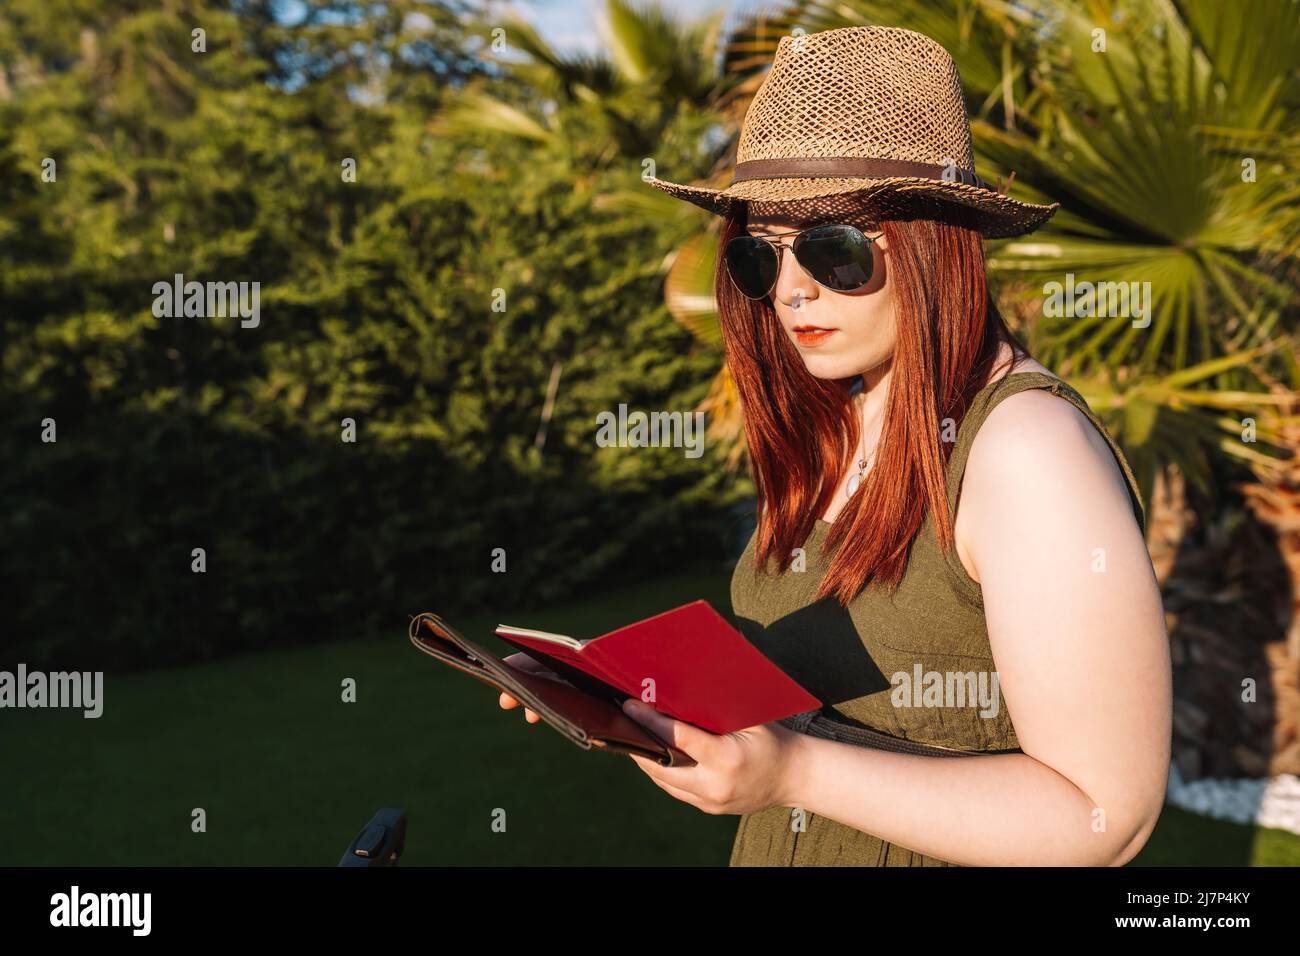 young woman on summer holiday, checking her passport at a tropical resort. Concept of trip, holiday, relaxation, hotel. Stock Photo